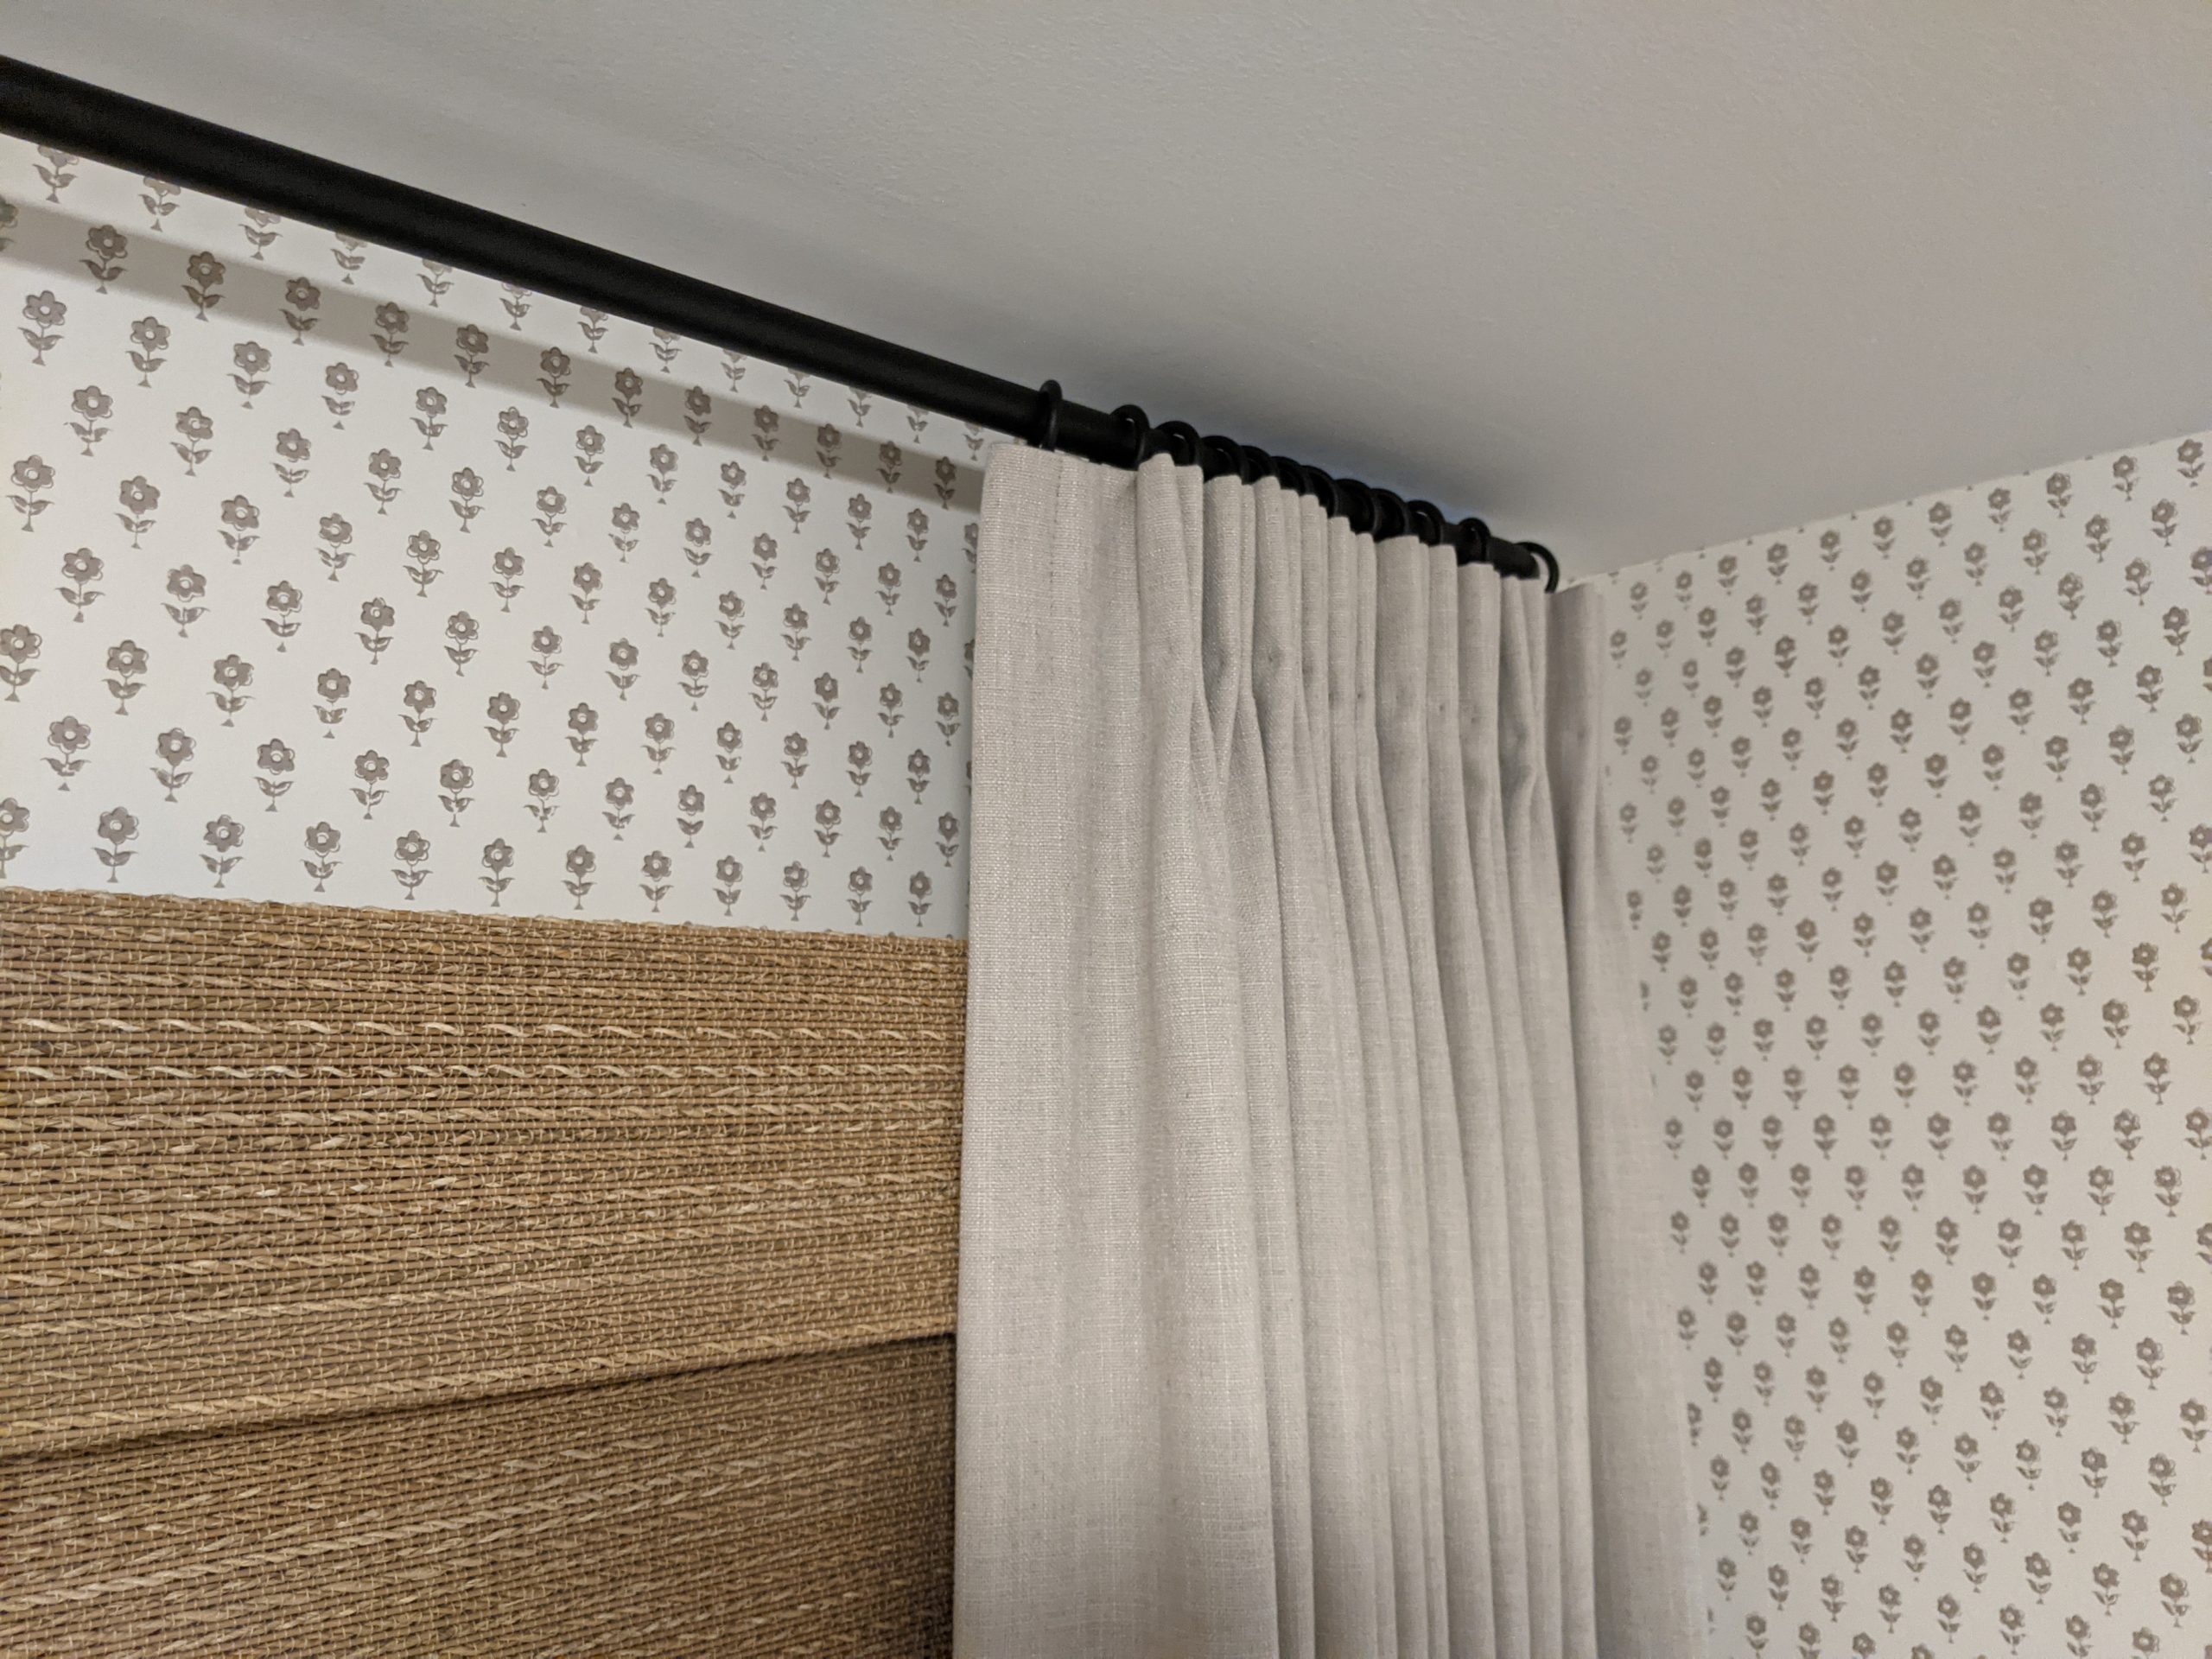 linen drapes over woven shades for added texture